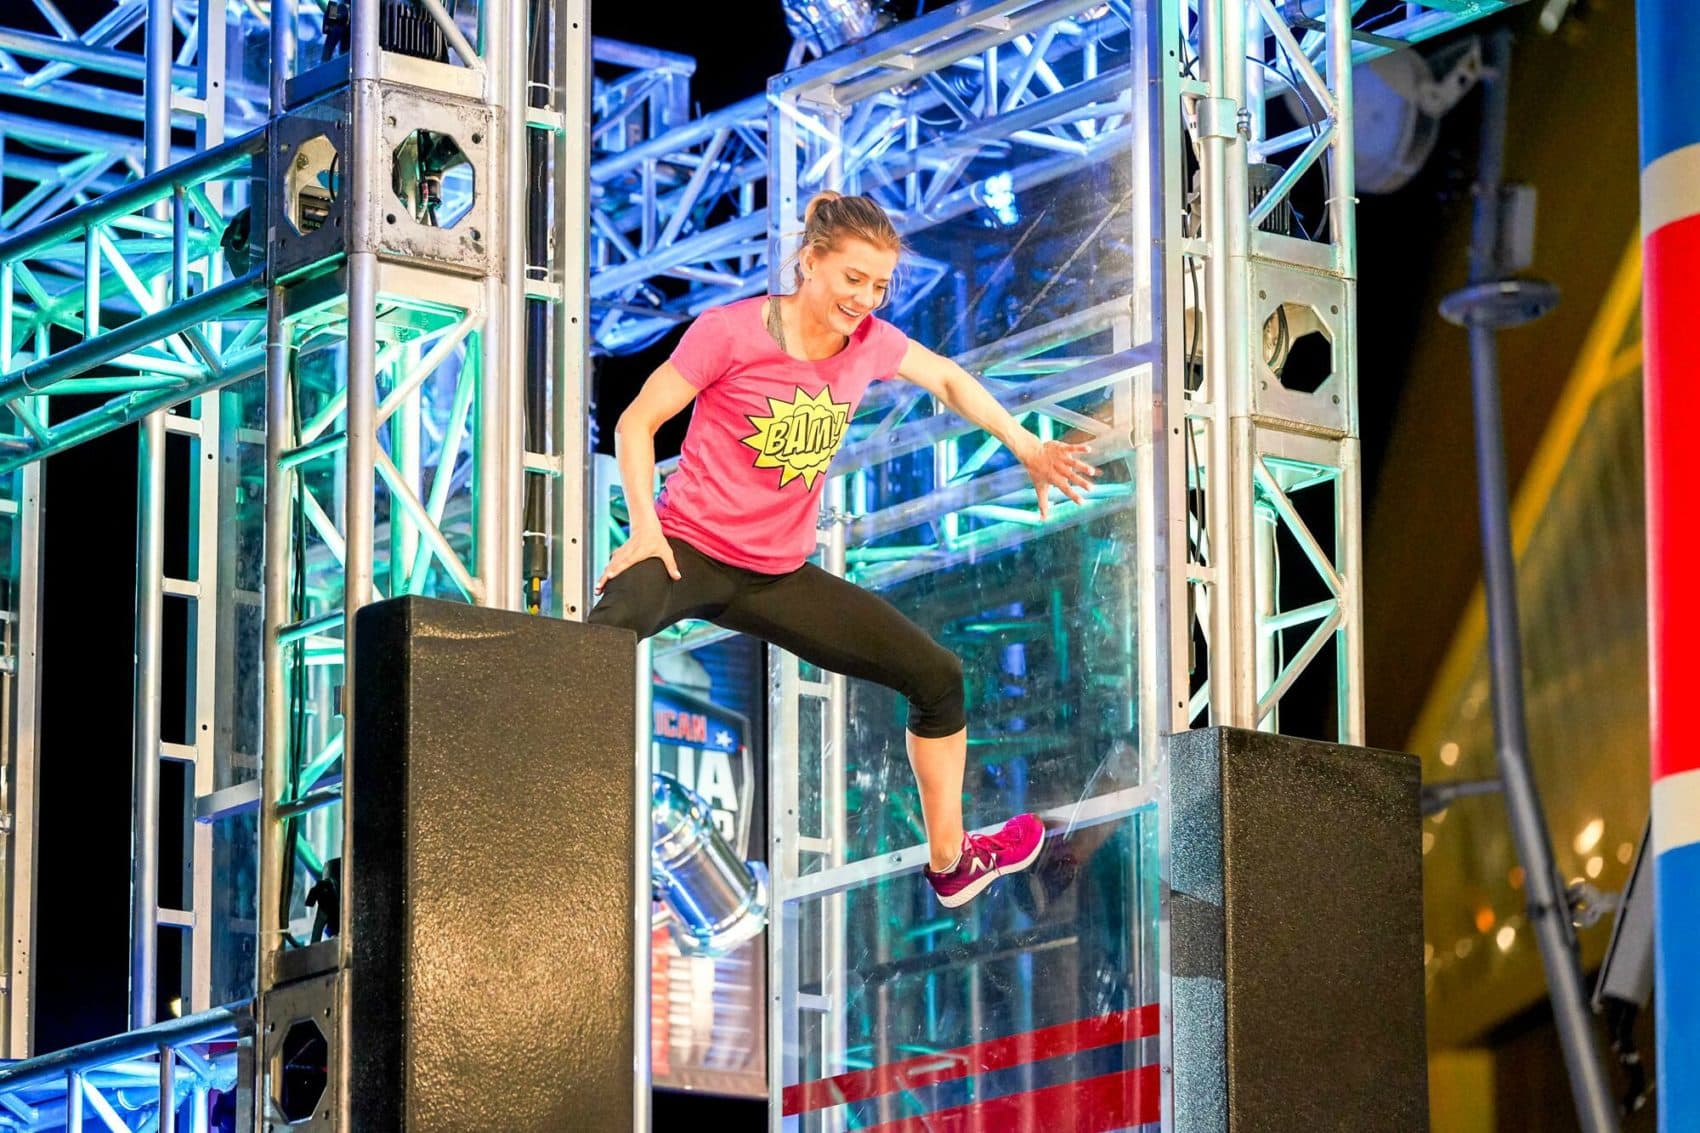 Mindy Hylton competes in the Atlanta qualifiers for &quot;American Ninja Warrior&quot; on NBC. (Quantrell Colbert/NBC)